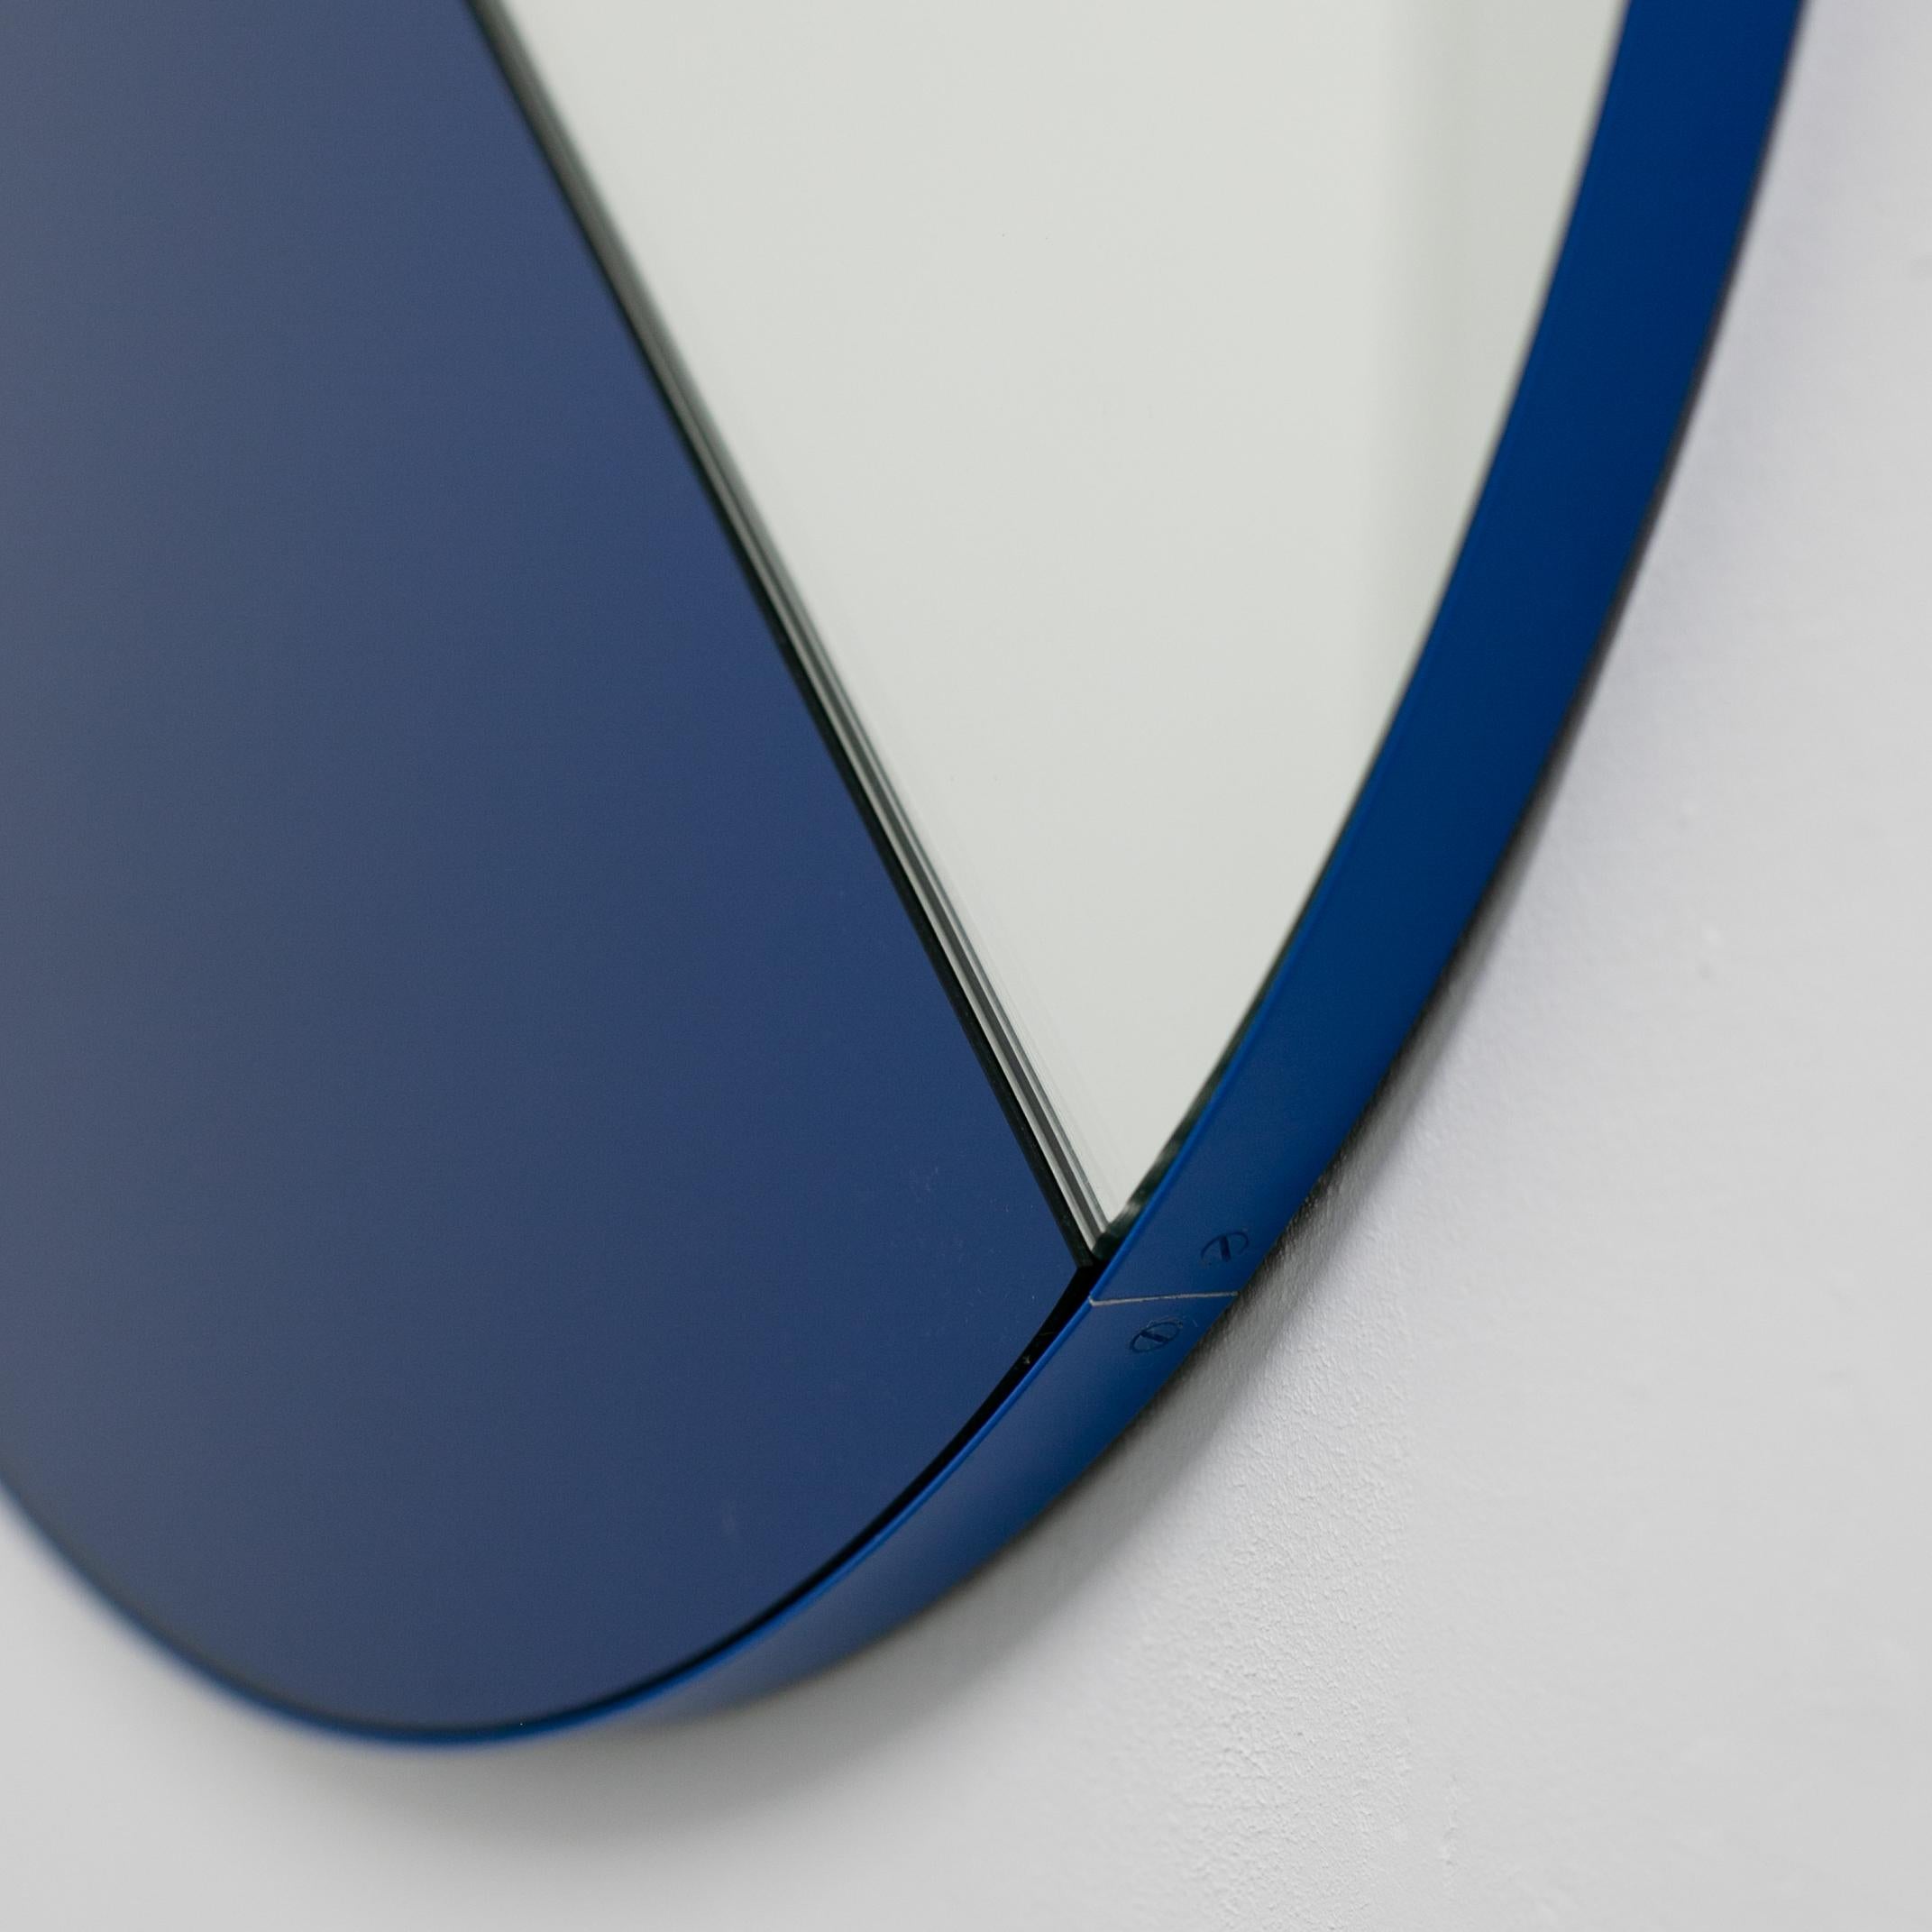 Orbis Dualis Mixed Blue Tinted Contemporary Round Mirror with Blue Frame, Small For Sale 3